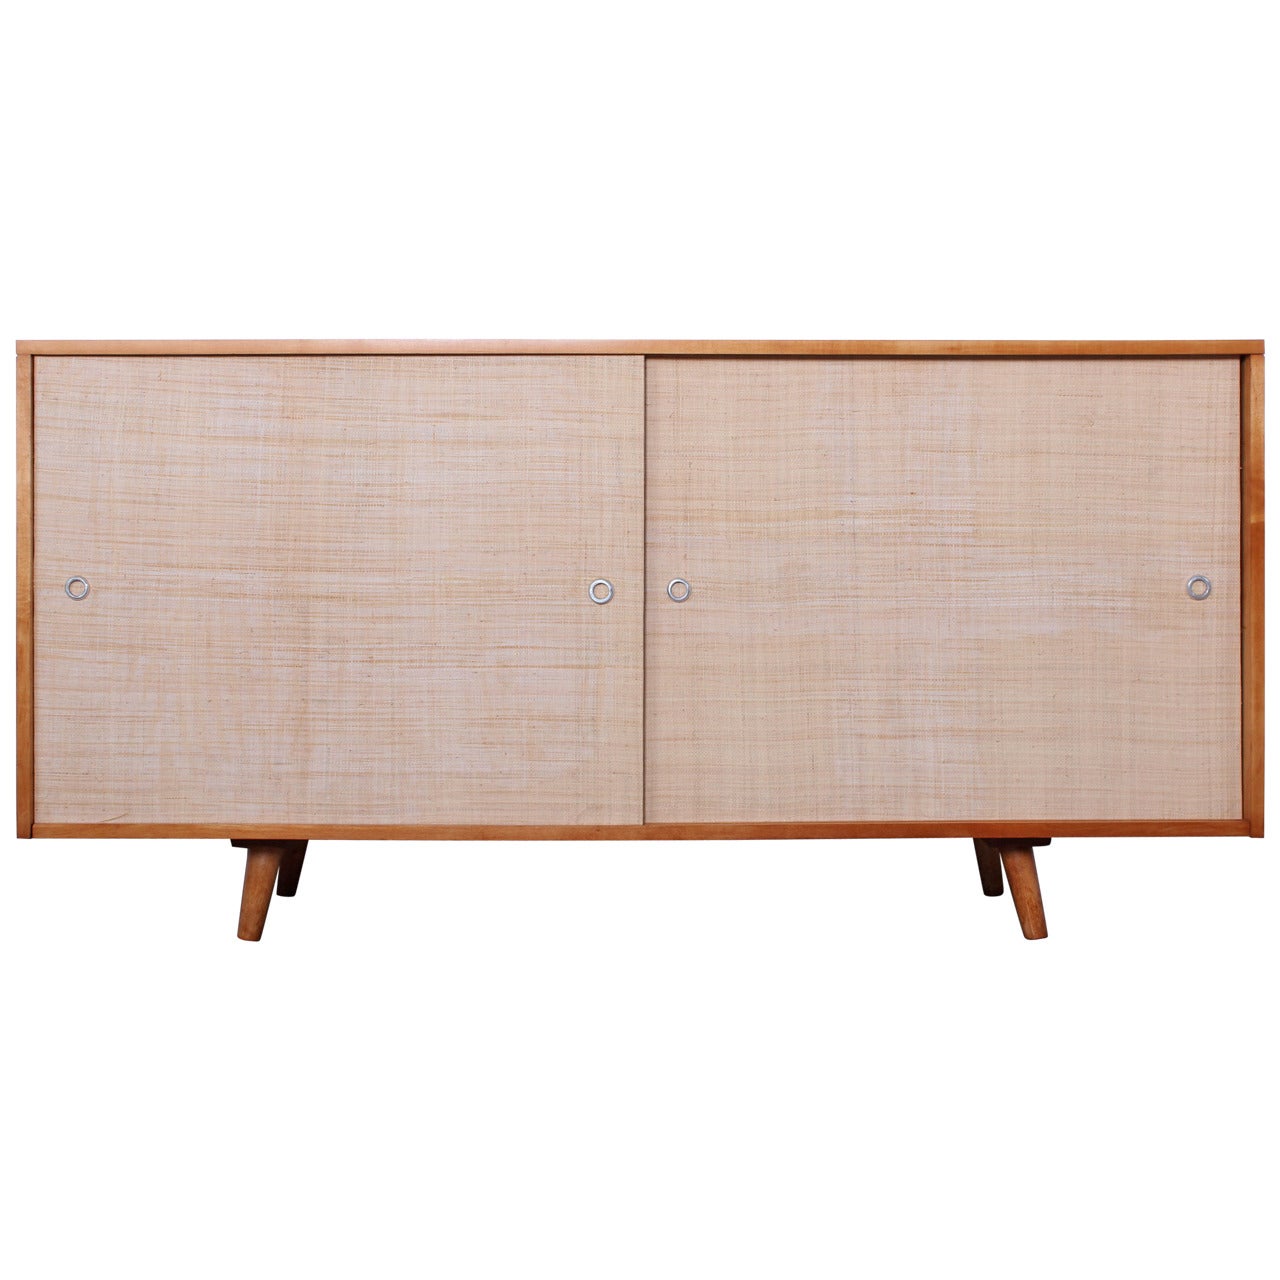 Maple Cabinet by Paul McCobb for Winchendon